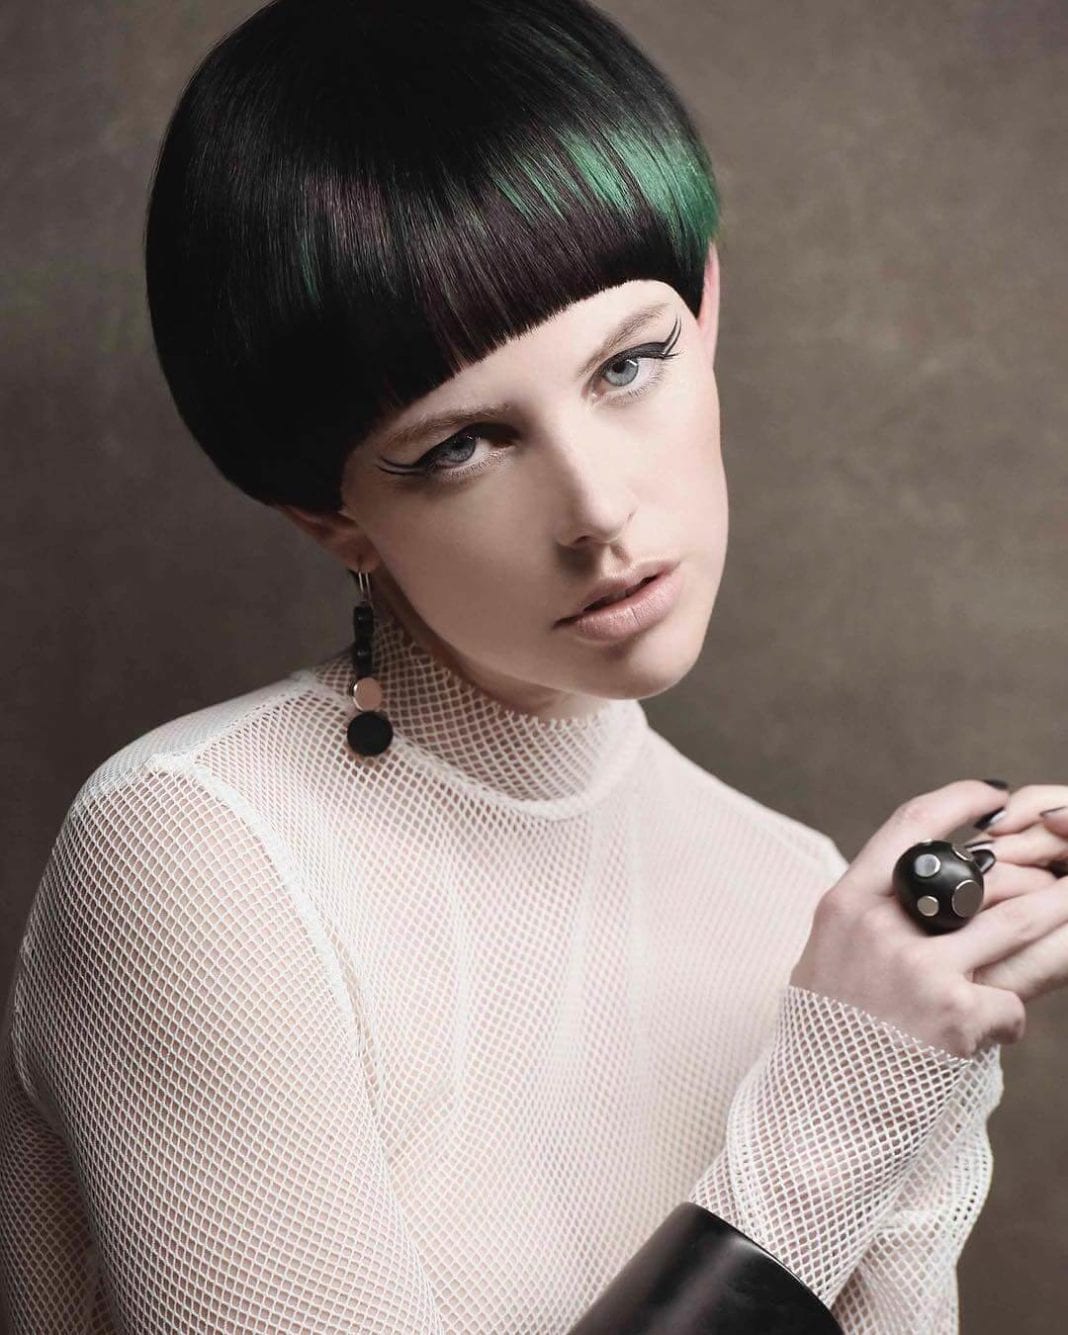 20 Unique and Creative Bowl Haircuts for Women - Hottest Haircuts